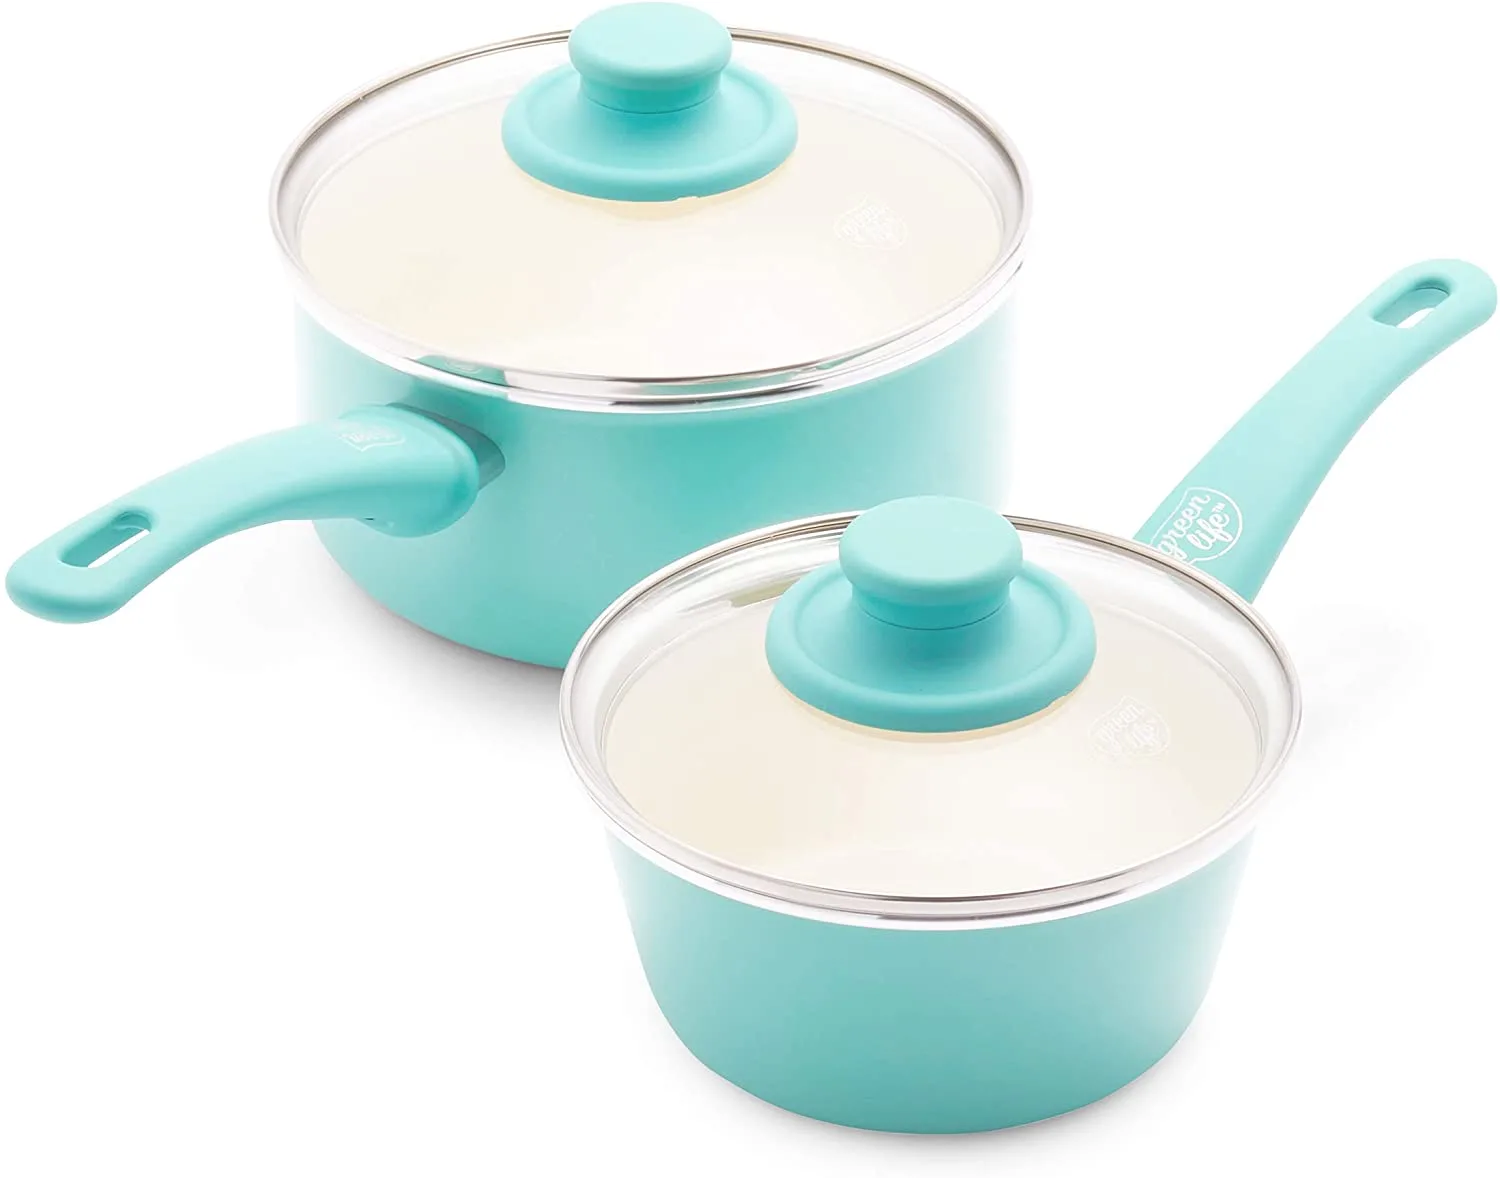 GreenLife Soft Grip Healthy Ceramic Nonstick, Saucepans with Lids